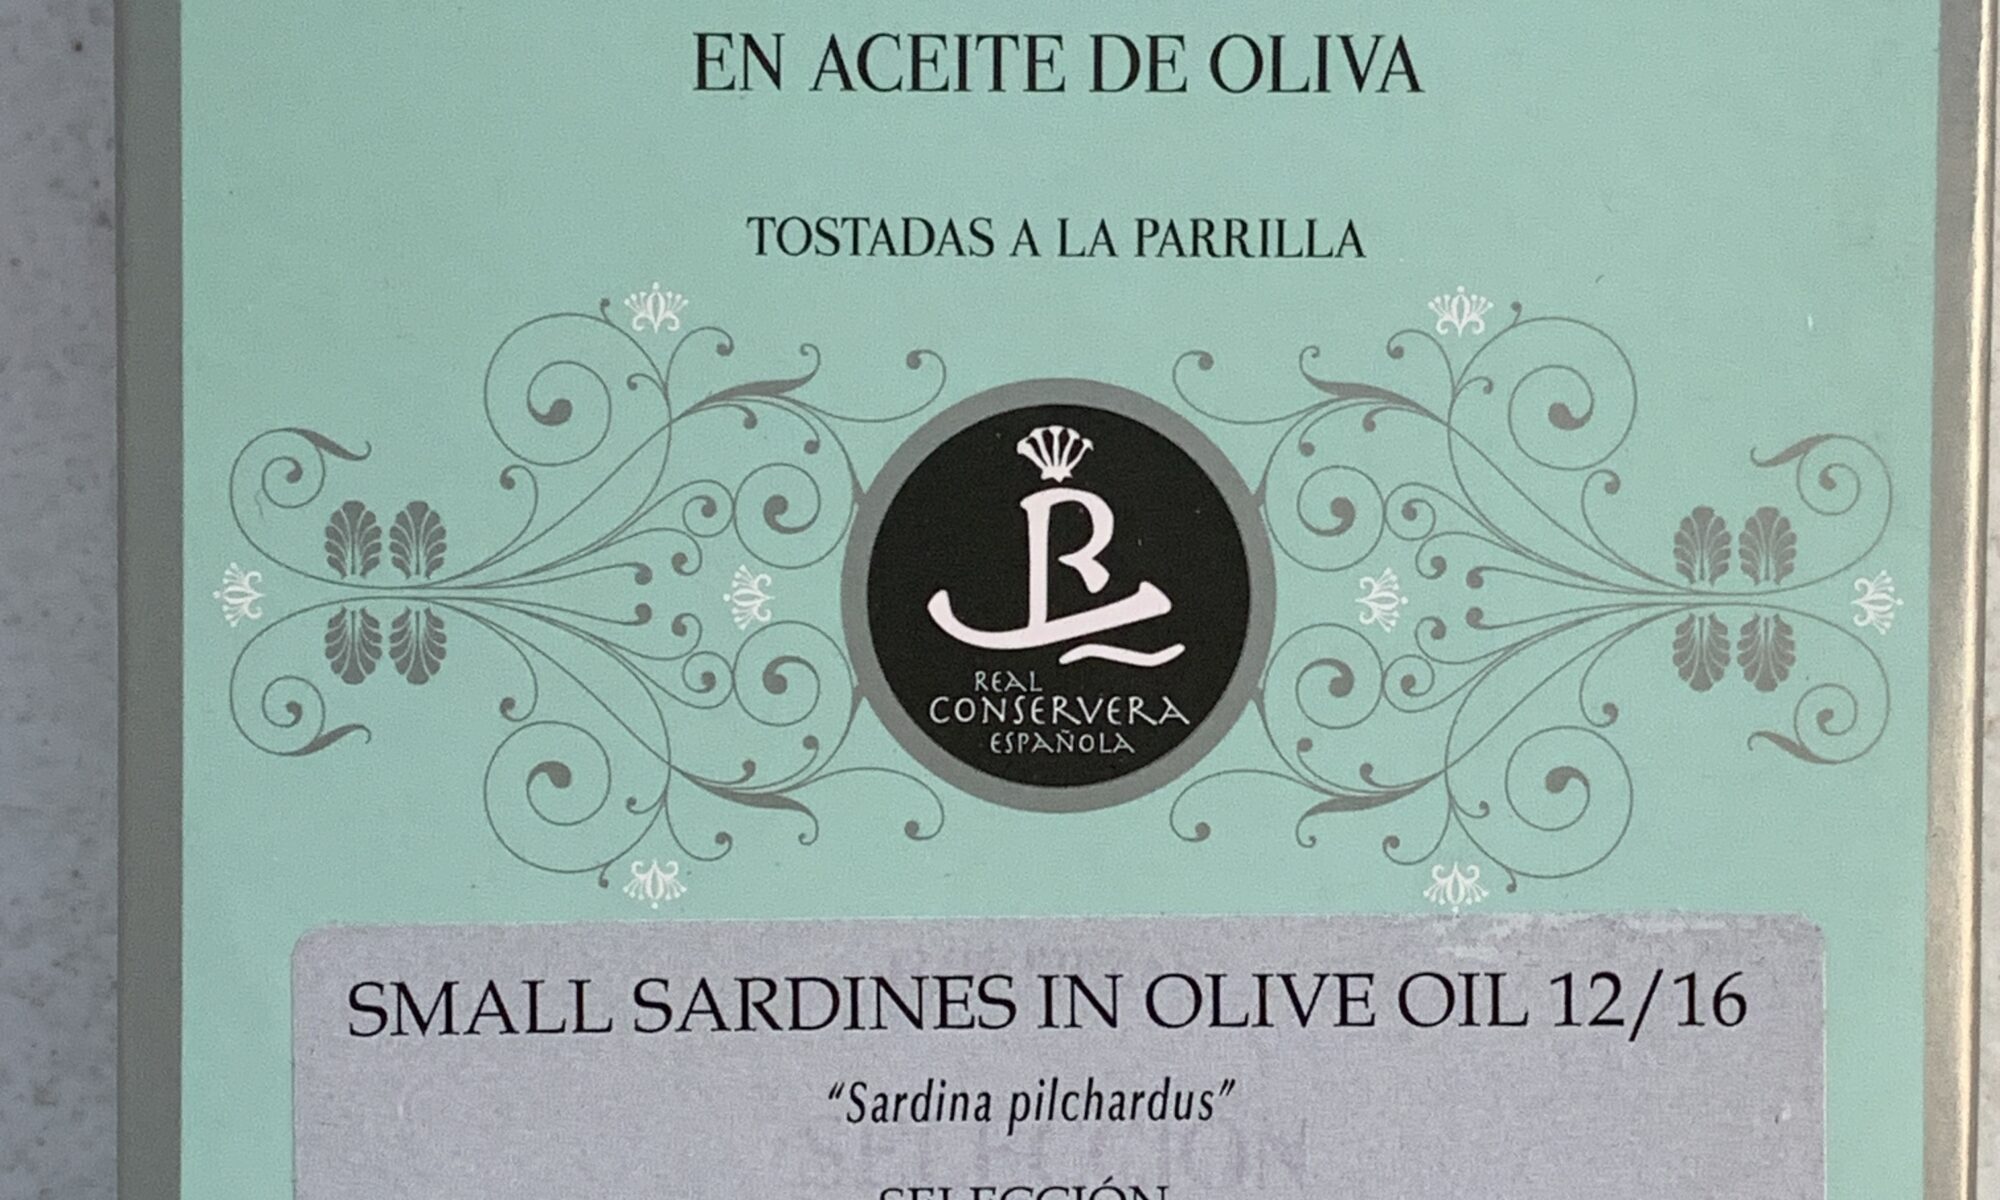 Image of the front of a package of Real Conservera Selección 1920 Small Sardines (Sardinillas) in Olive Oil 12/16